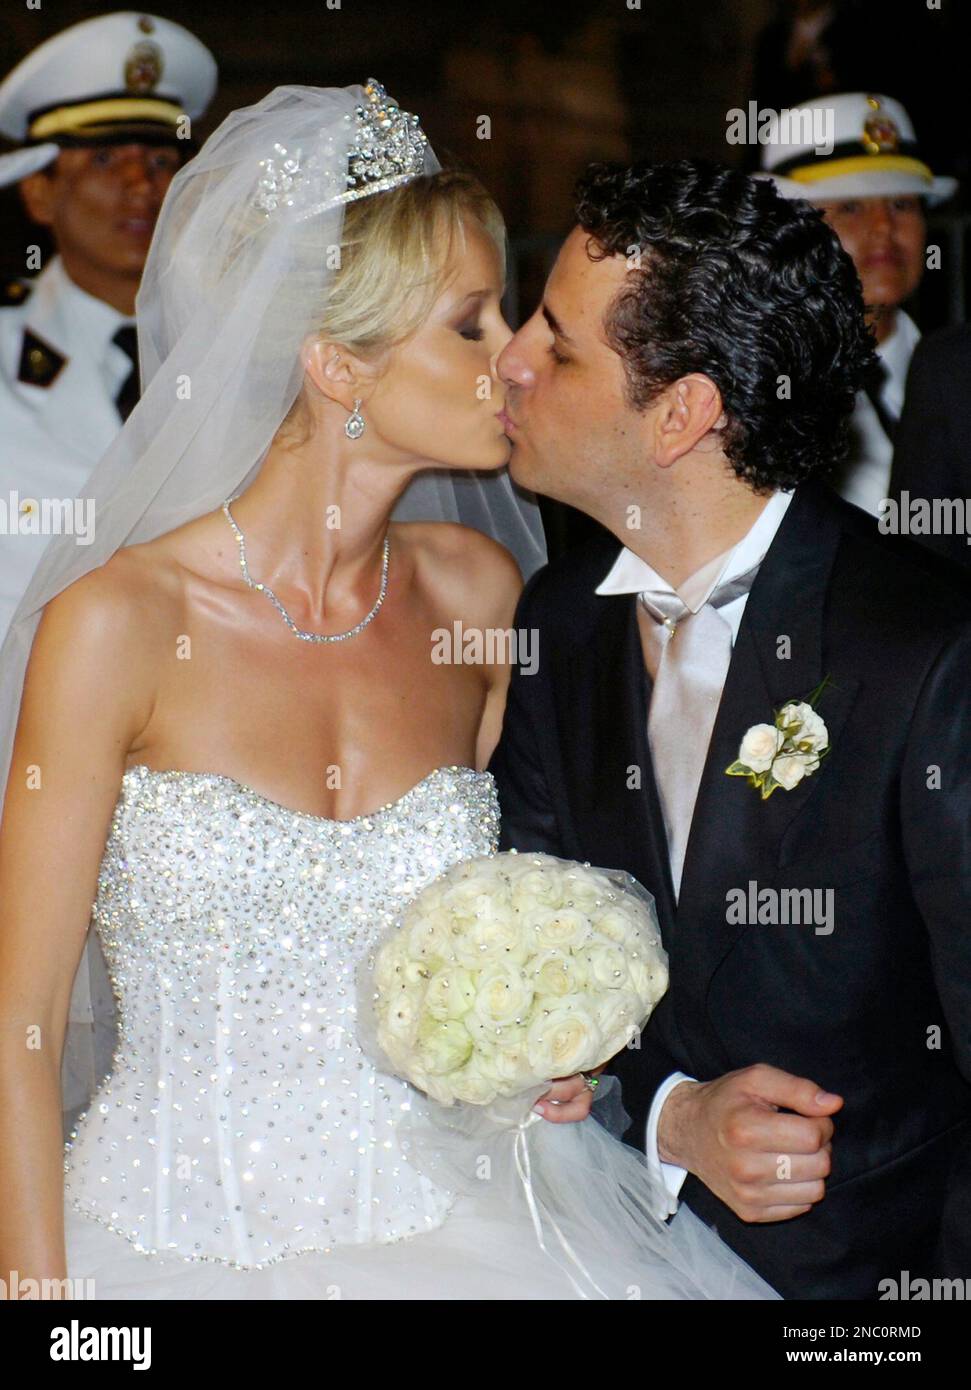 In this April 5, 2008 photo, Peruvian opera tenor Juan Diego Florez kisses his wife, Australian Julia Trappe Florez, after their wedding in Lima, Peru. Juan Diego Florez assisted two mid-wives as they helped Julia deliver their first child, Leandro Florez at 12:25 p.m., on Saturday, April 9, 2011, in New York. Juan Diego Florez was able to hold his son for a moment before rushing off for his 1 p.m. performance at the Metropolitan Opera. (AP Photo/Karel Navarro) Stock Photo